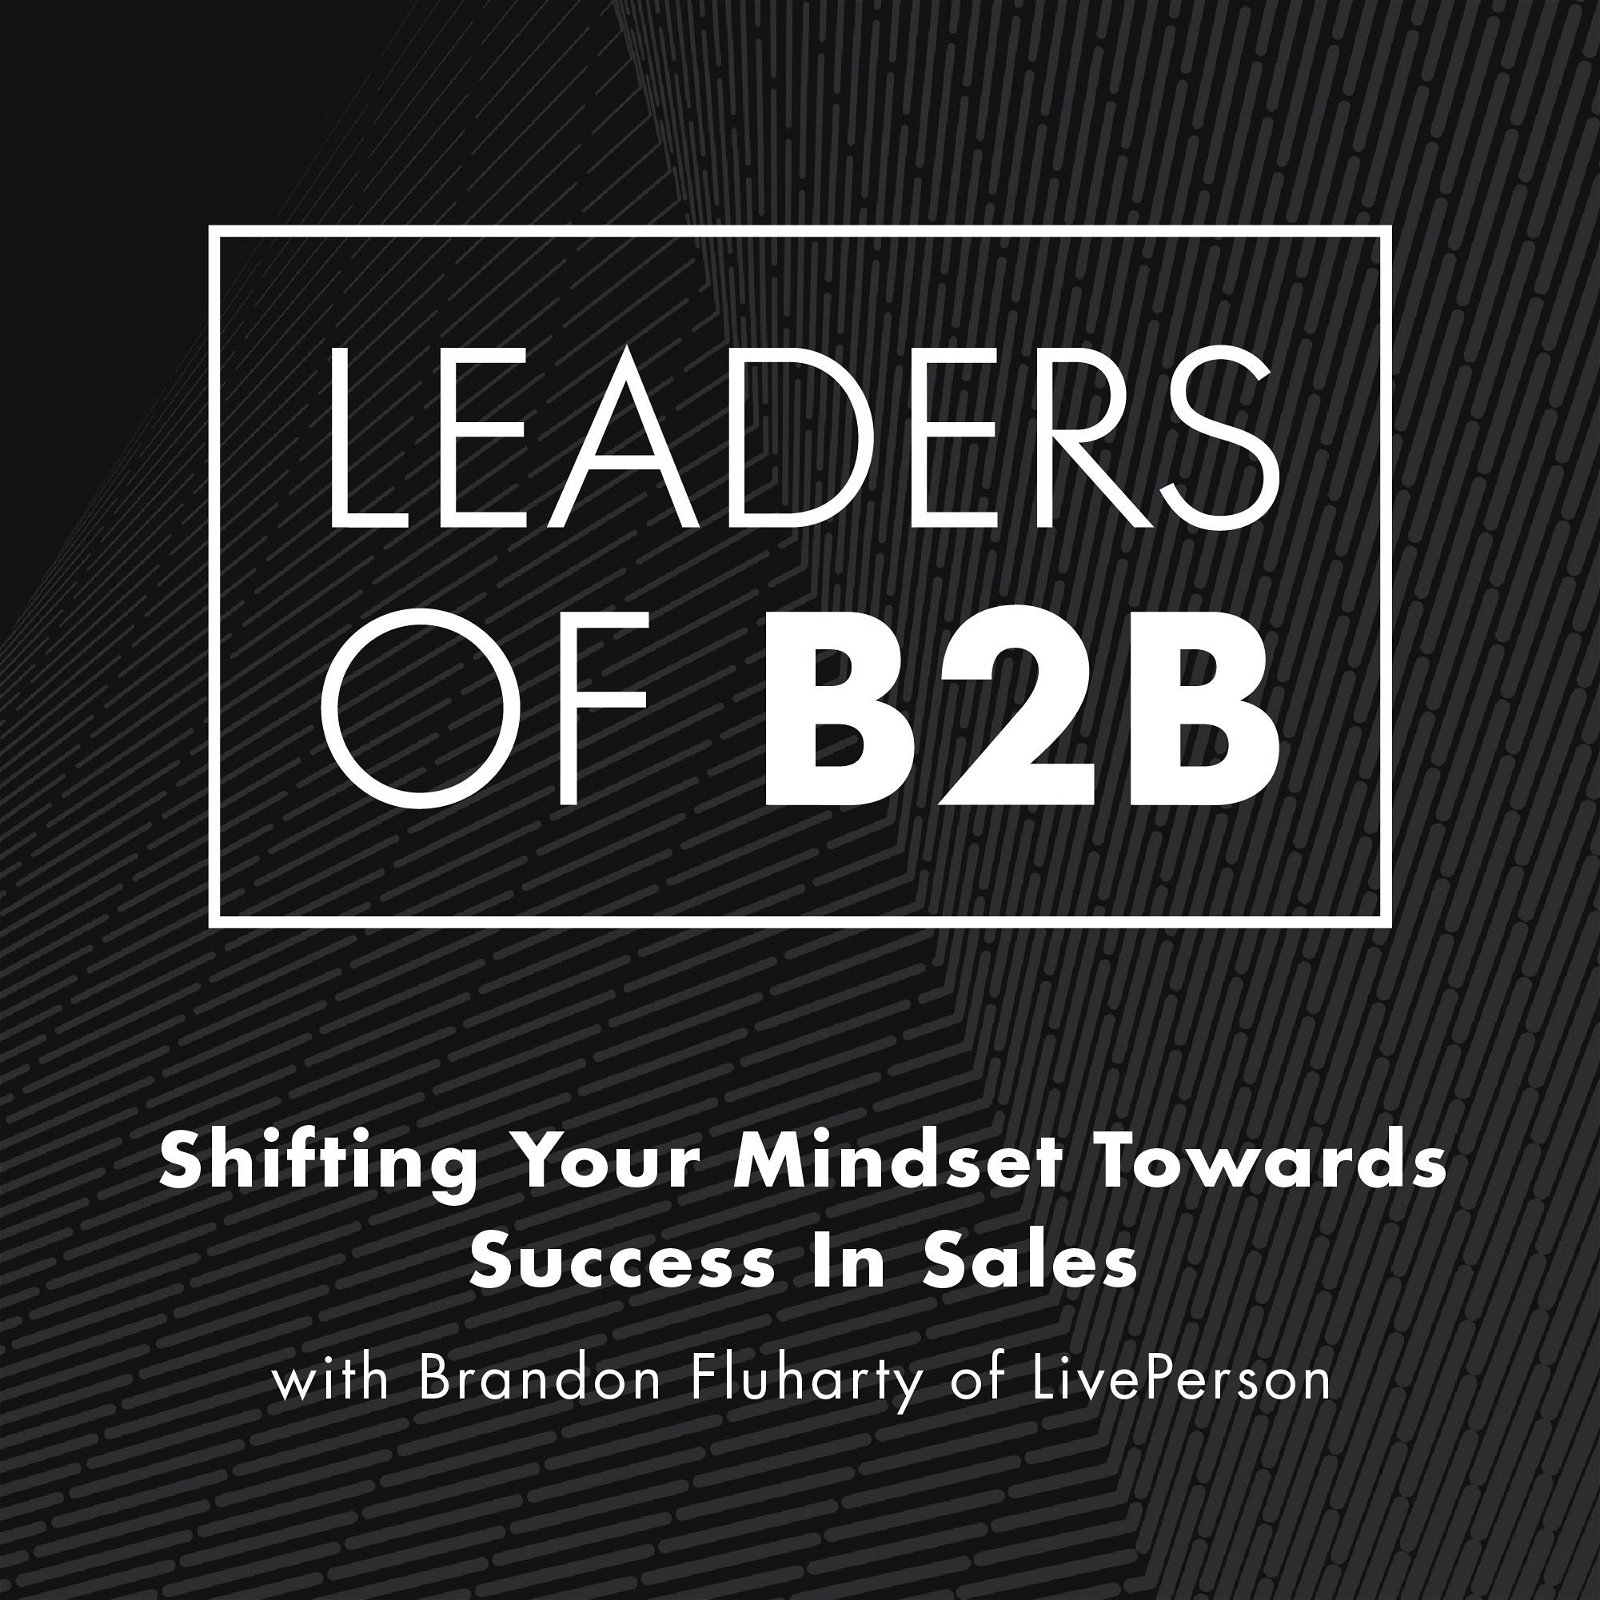 Shifting Your Mindset Towards Success In Sales with Brandon Fluharty of LivePerson